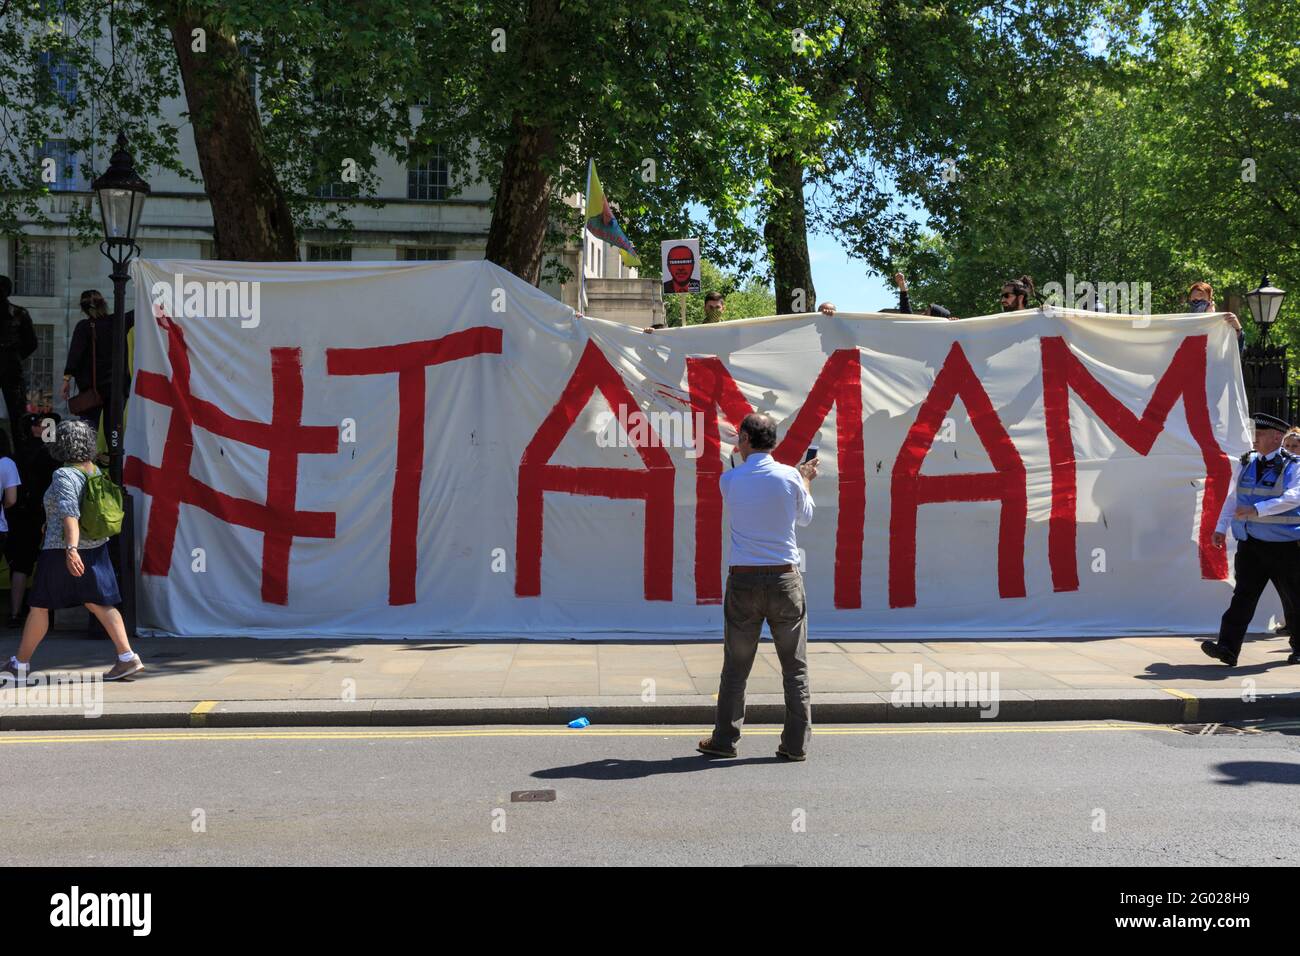 Kurdish Protesters hold a banner saying 'Tamam' commenting on the arrival of Turkish president Erdogan in Westminster, London, UK Stock Photo